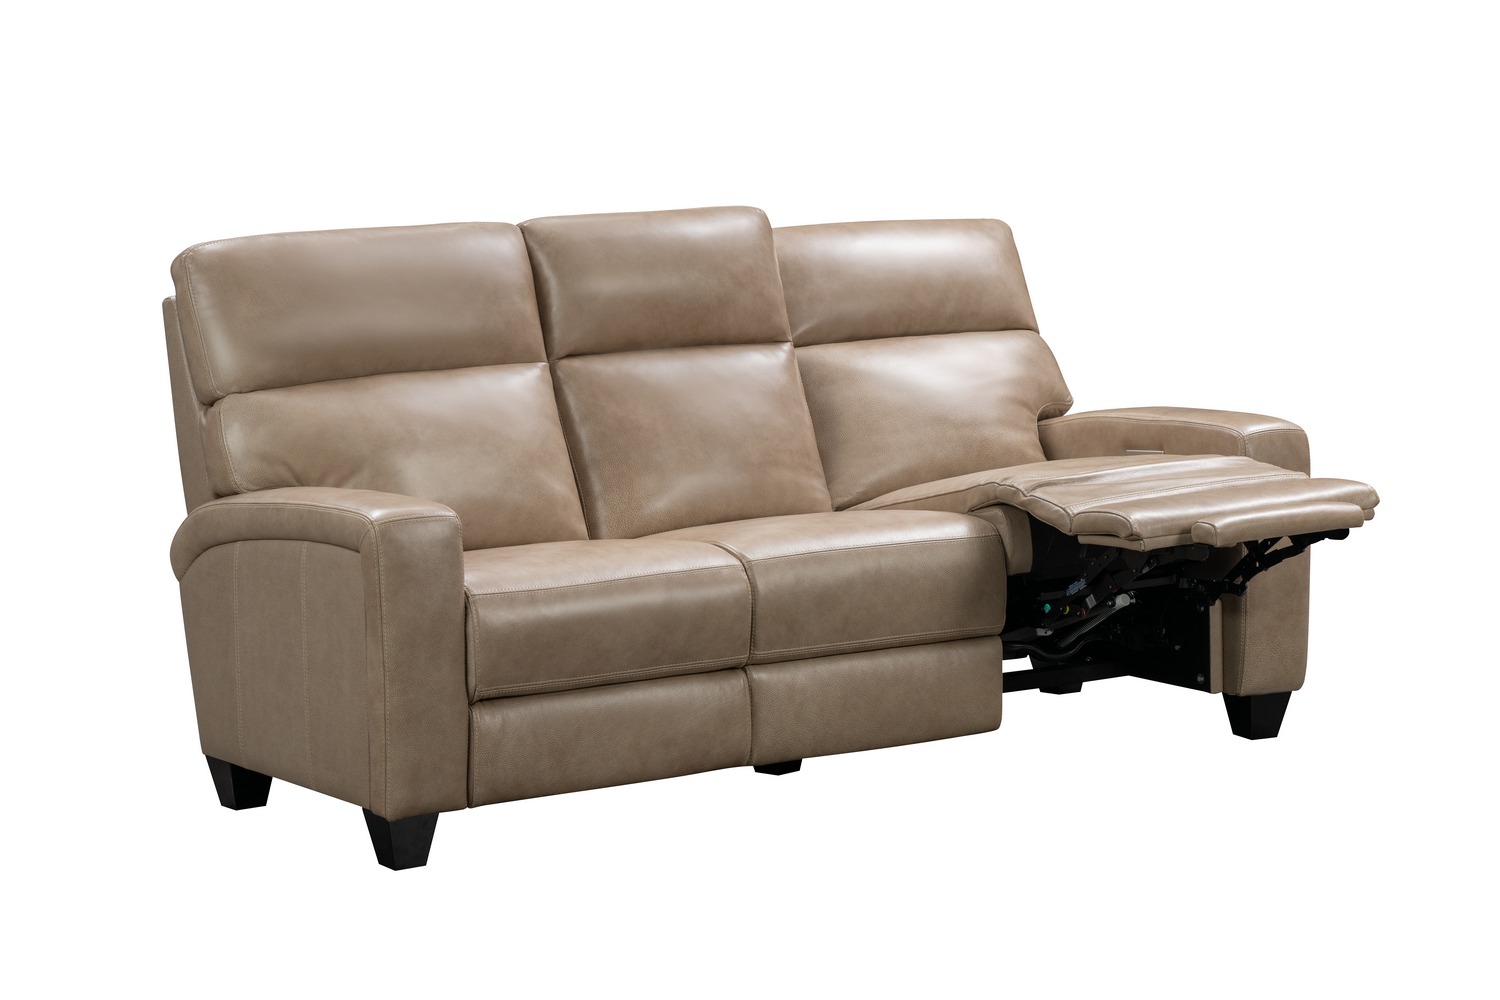 Barcalounger Marcello Power Reclining Sofa with Power Head Rests and Power Lumbar - Elliot Taupe/Leather Match